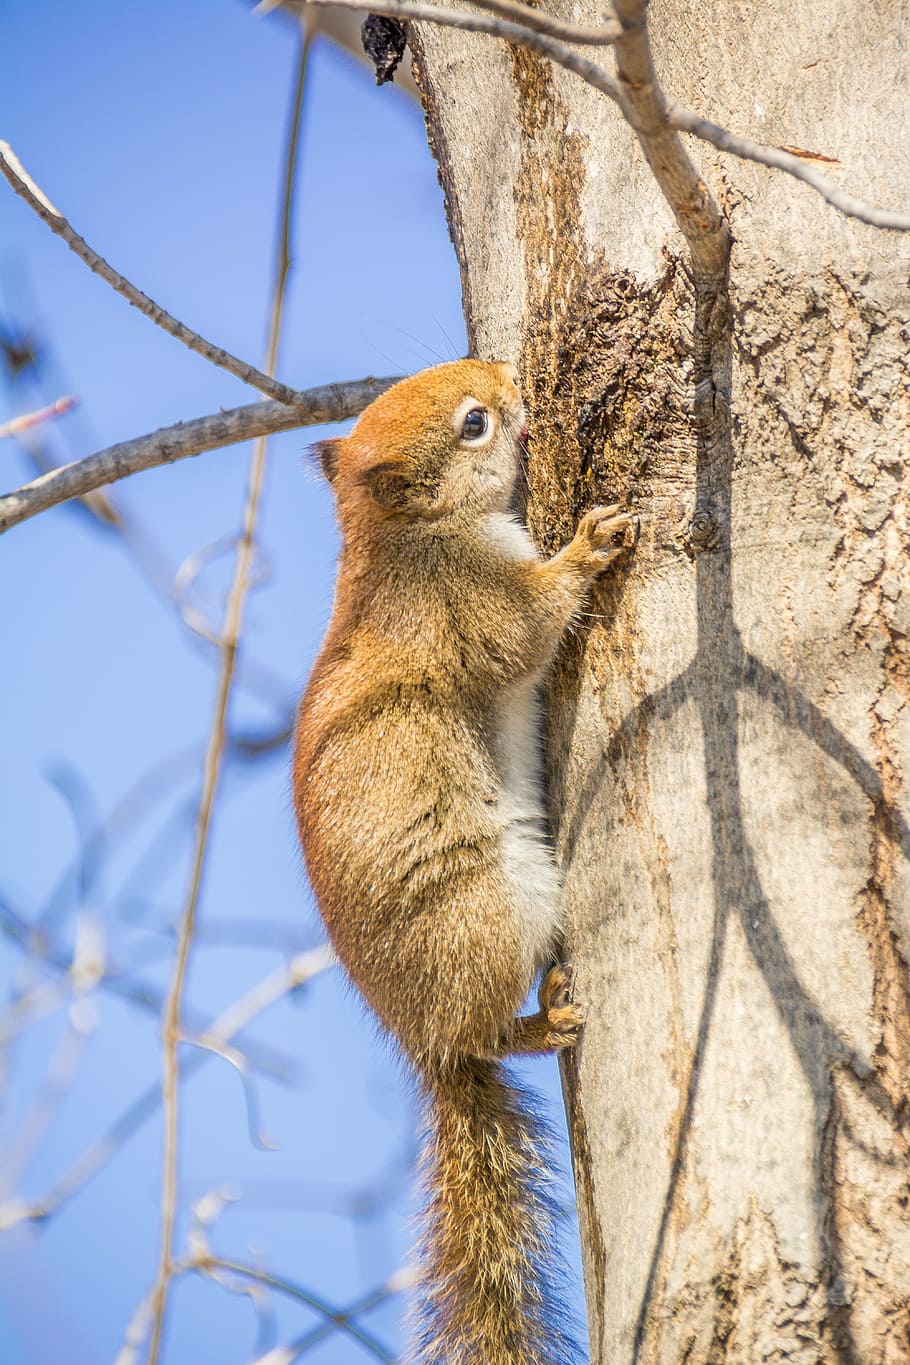 red squirrel, rodent, squirrel, nature, wildlife, cute, wild, small, furry, animal